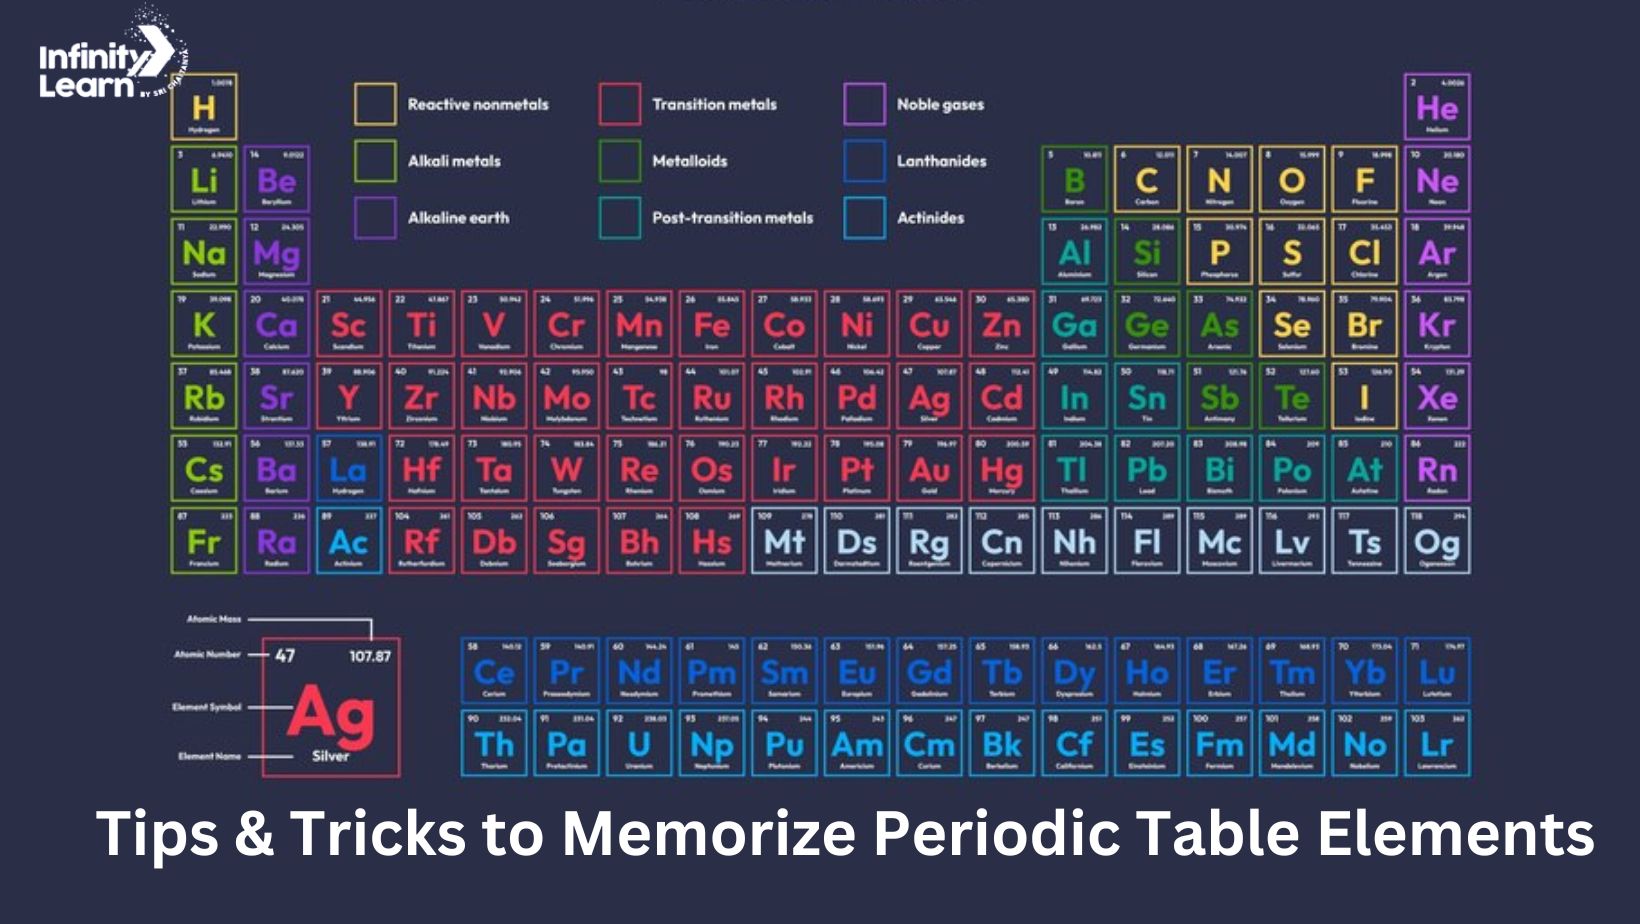 Tips & Tricks to Memorize Periodic Table Elements